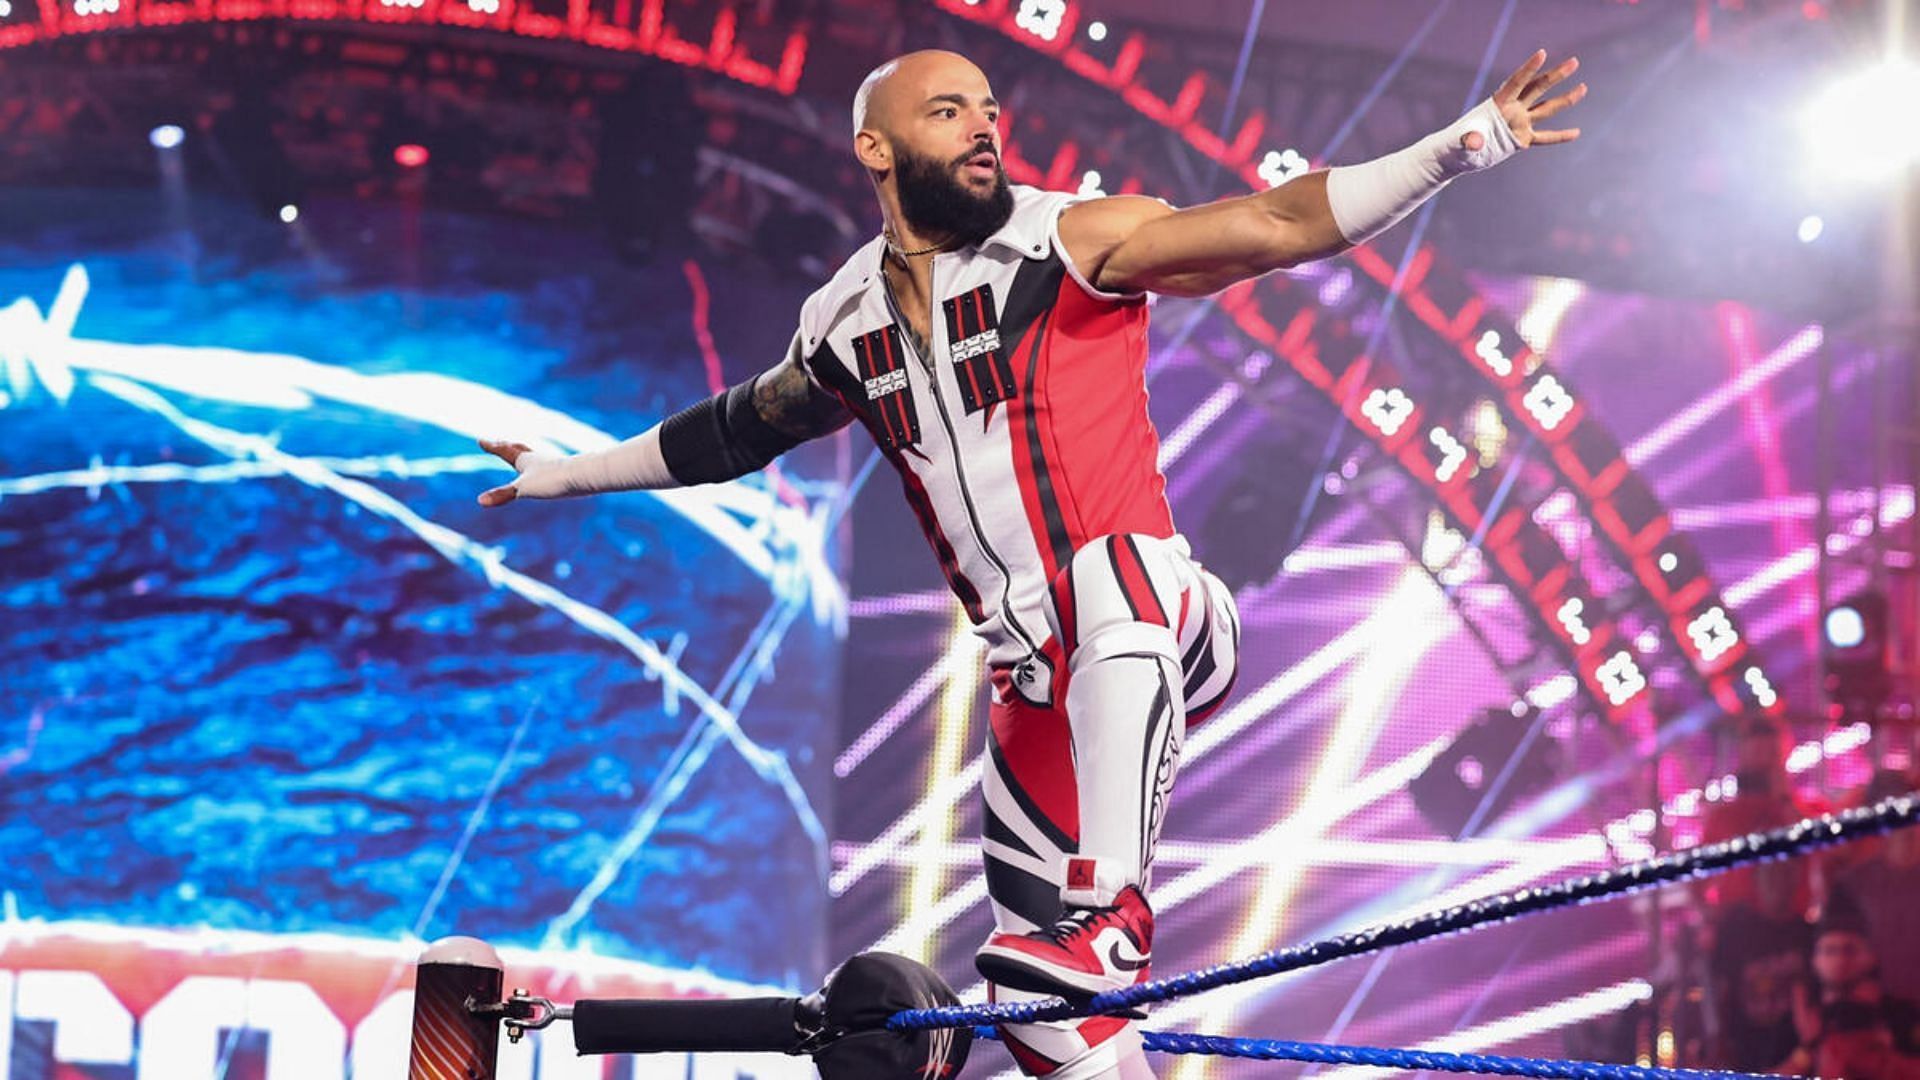 Is Ricochet about to undergo a character change? (Image credit: WWE)